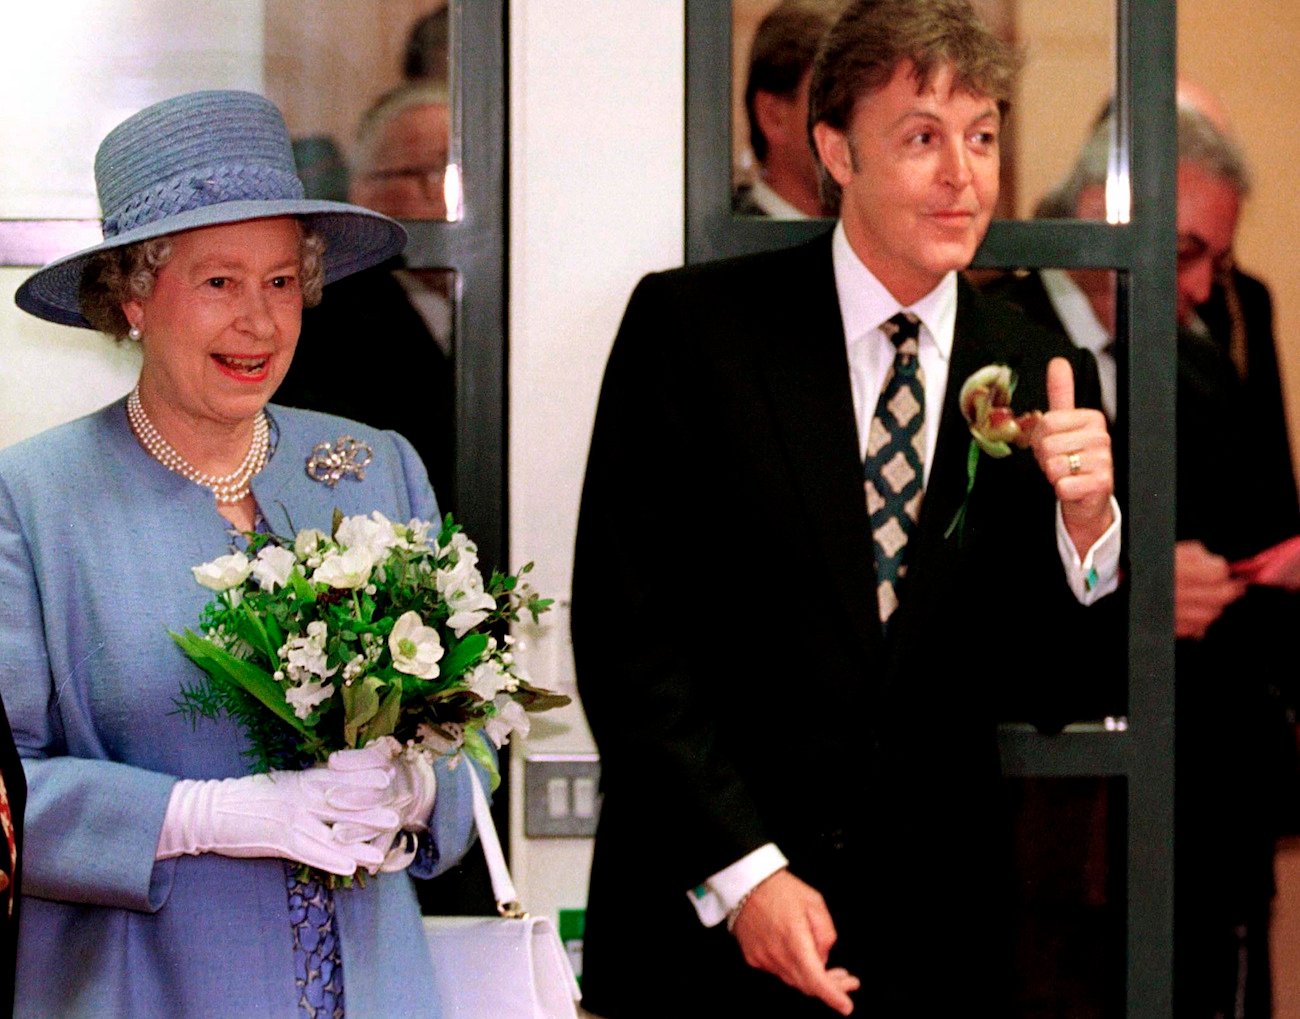 Queen Elizabeth and Paul McCartney at the Liverpool Institute for Performing Arts in 1996.